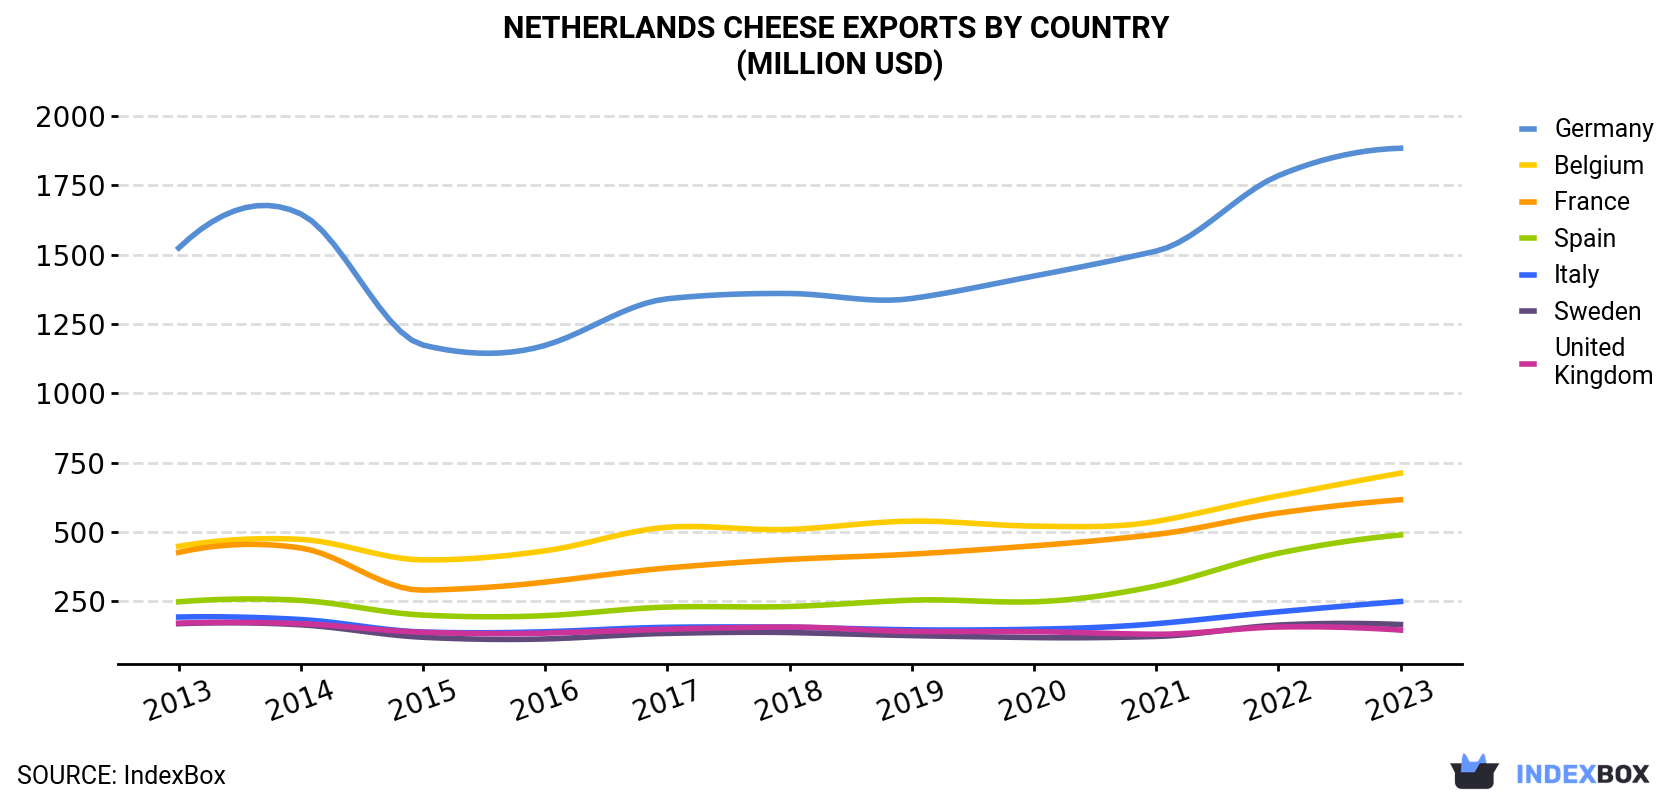 Netherlands Cheese Exports By Country (Million USD)